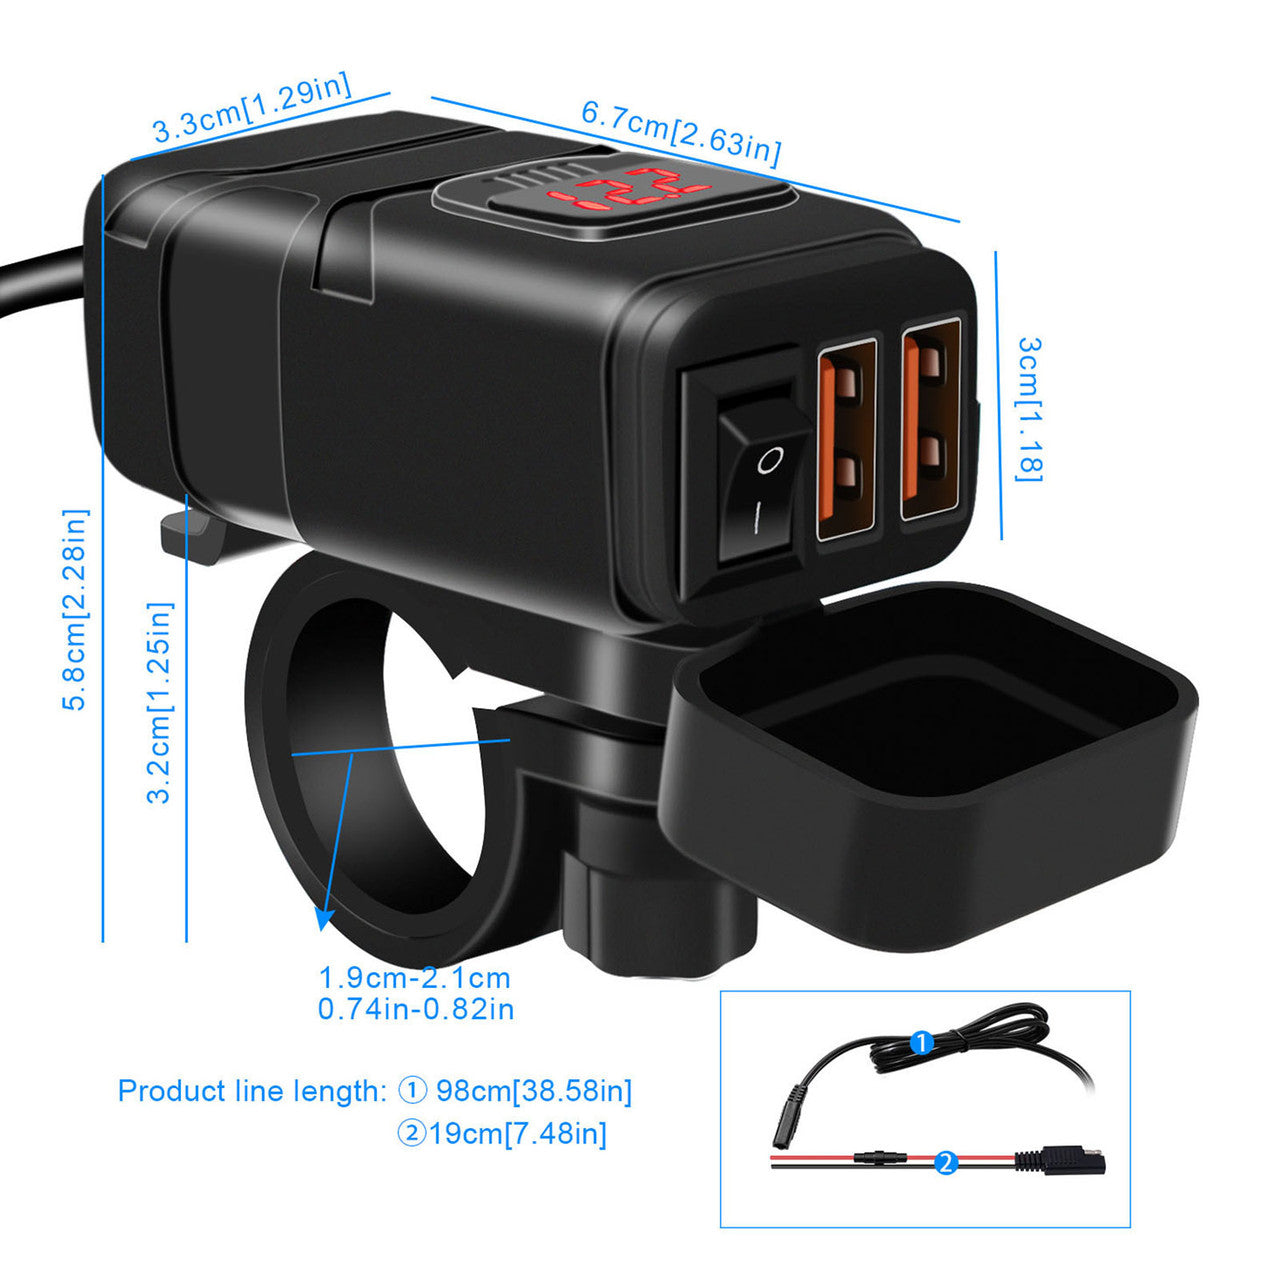 Waterproof Motorcycle Ring Terminal to Dual USB Charger Port Adapter Kit Cable for Smart Phone GPS Tablet Camera, Keep Connected While You Ride